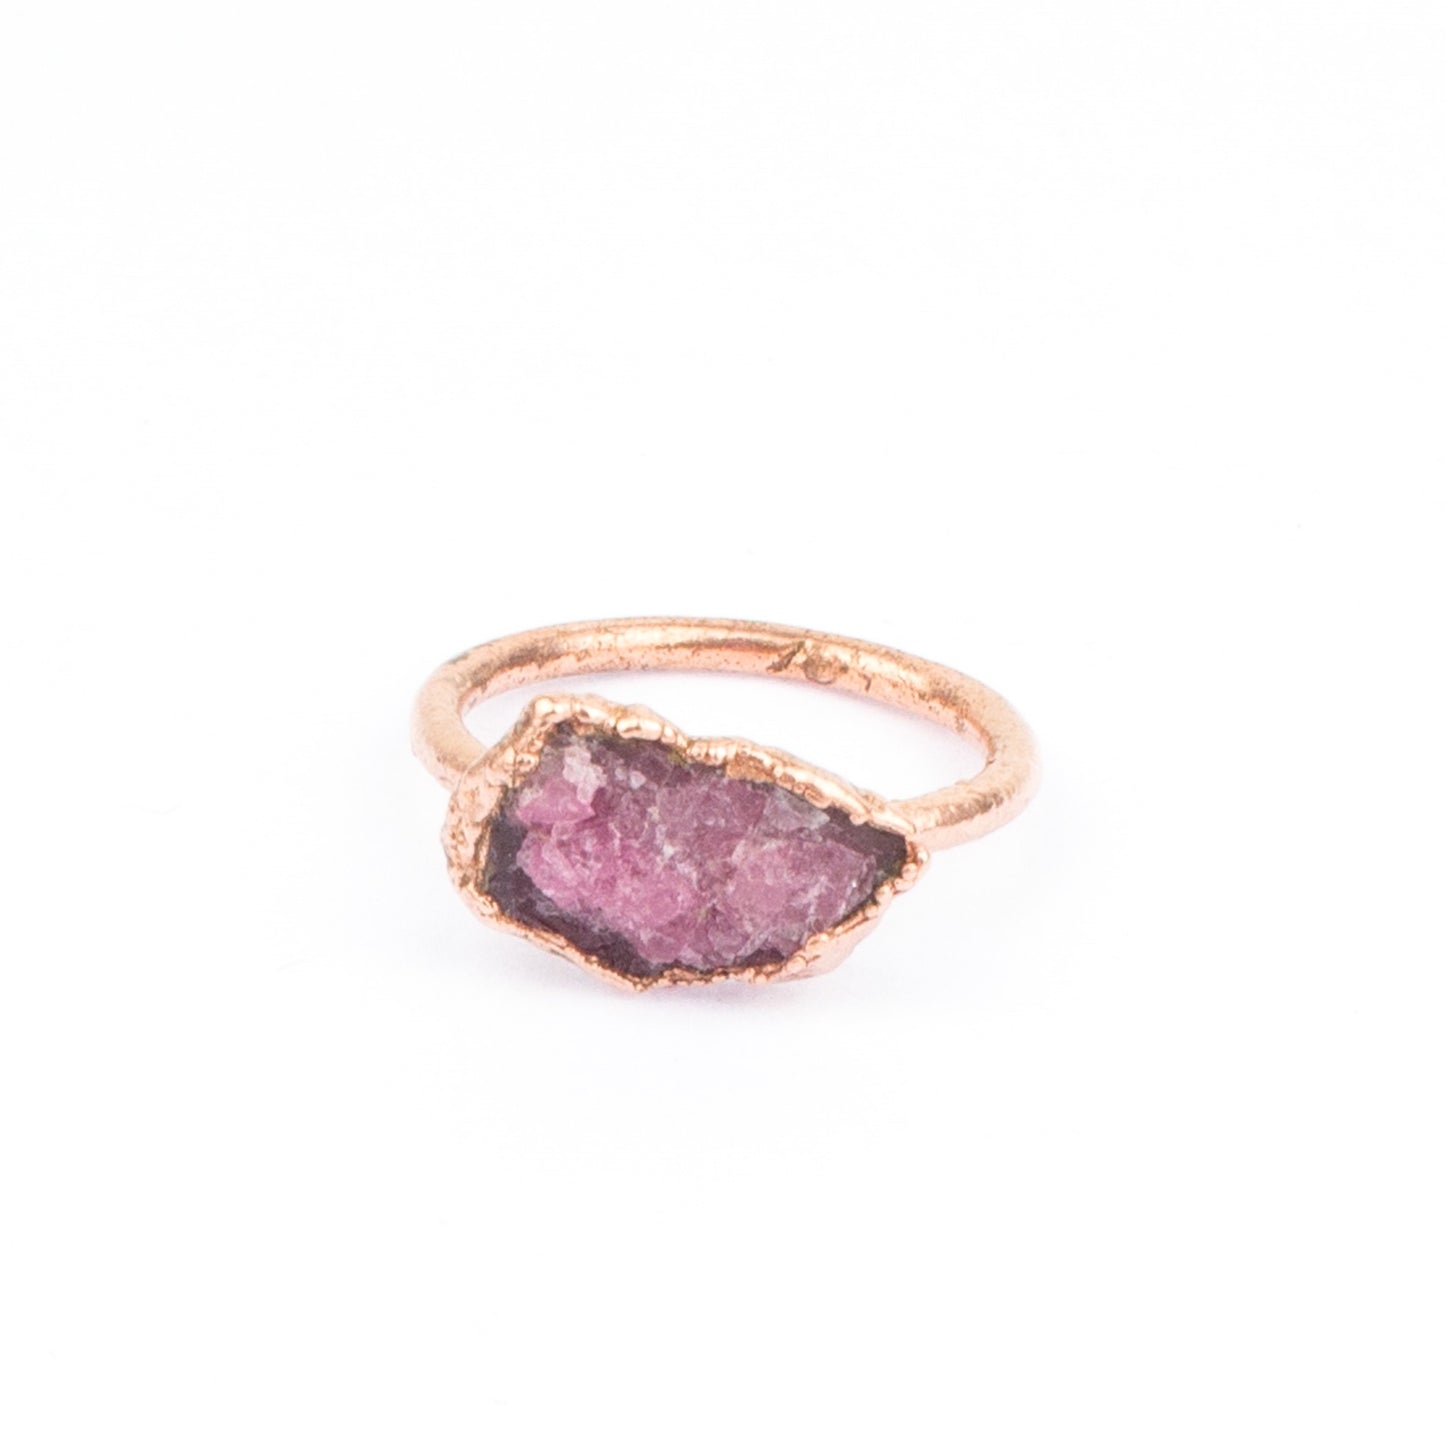 Large Pink Tourmaline Solitaire Ring (October Birthstone)